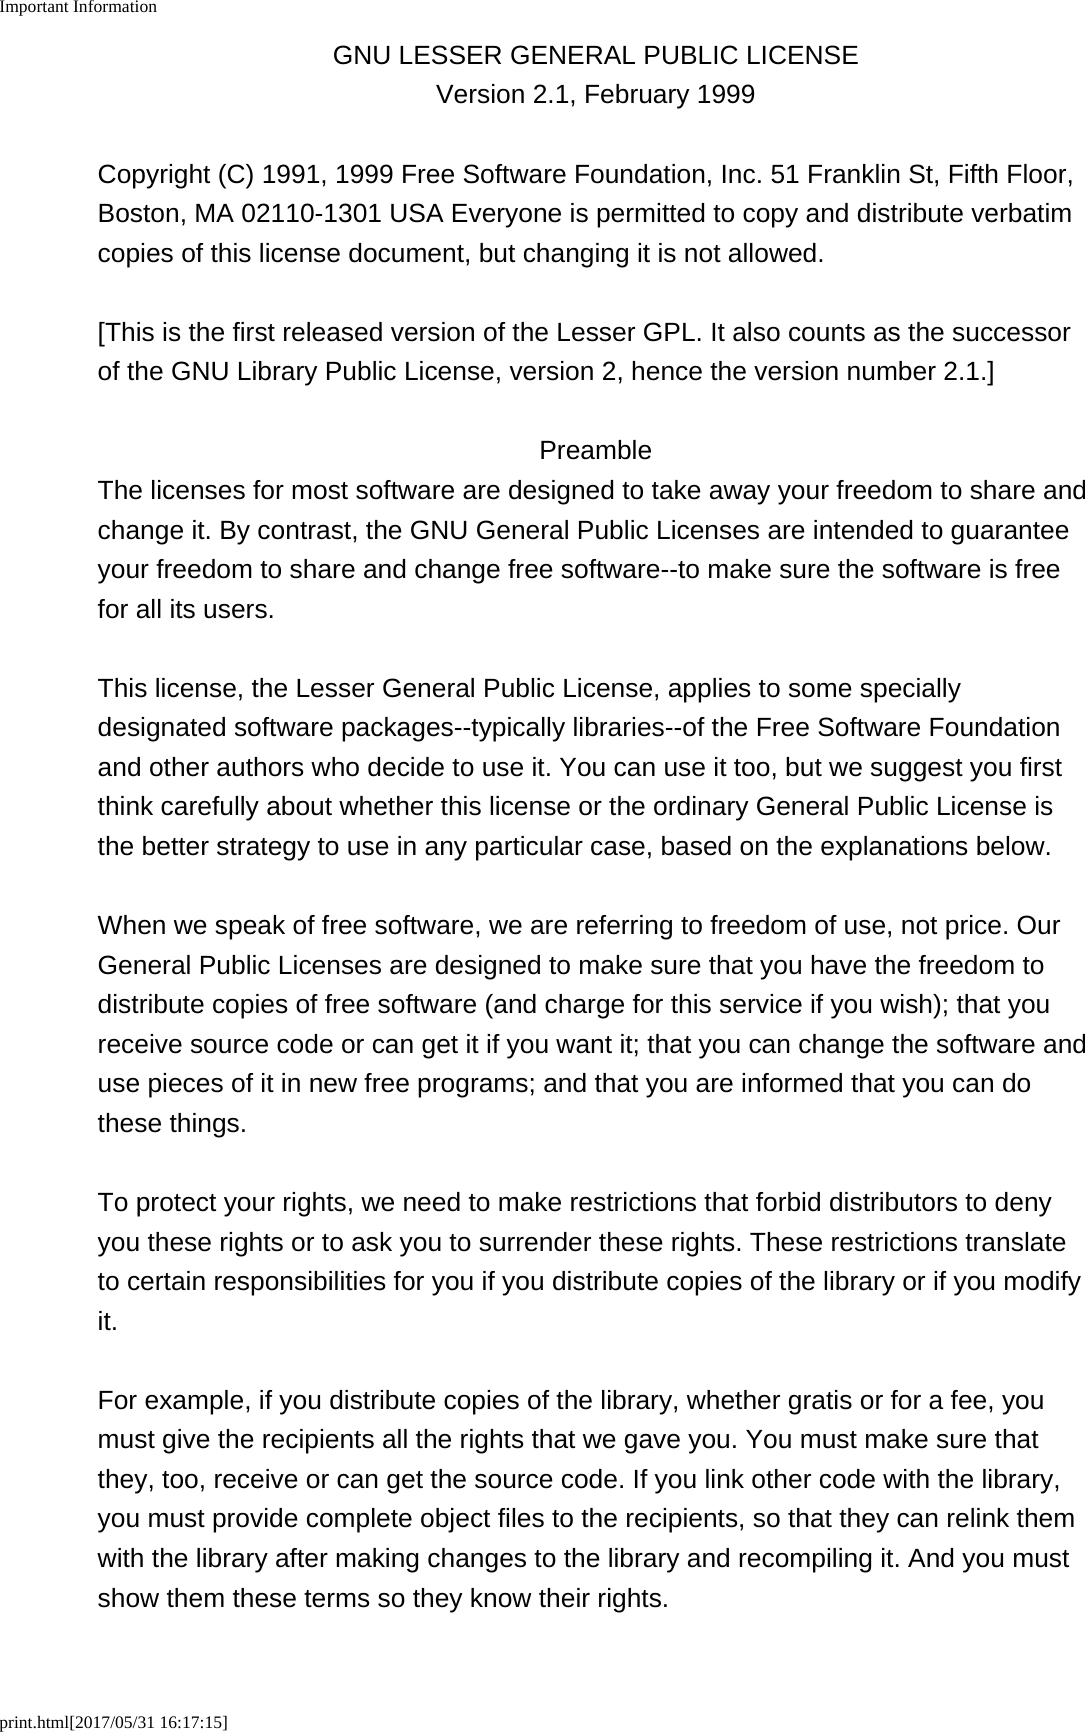 Important Informationprint.html[2017/05/31 16:17:15]GNU LESSER GENERAL PUBLIC LICENSEVersion 2.1, February 1999Copyright (C) 1991, 1999 Free Software Foundation, Inc. 51 Franklin St, Fifth Floor,Boston, MA 02110-1301 USA Everyone is permitted to copy and distribute verbatimcopies of this license document, but changing it is not allowed.[This is the first released version of the Lesser GPL. It also counts as the successorof the GNU Library Public License, version 2, hence the version number 2.1.]PreambleThe licenses for most software are designed to take away your freedom to share andchange it. By contrast, the GNU General Public Licenses are intended to guaranteeyour freedom to share and change free software--to make sure the software is freefor all its users.This license, the Lesser General Public License, applies to some speciallydesignated software packages--typically libraries--of the Free Software Foundationand other authors who decide to use it. You can use it too, but we suggest you firstthink carefully about whether this license or the ordinary General Public License isthe better strategy to use in any particular case, based on the explanations below.When we speak of free software, we are referring to freedom of use, not price. OurGeneral Public Licenses are designed to make sure that you have the freedom todistribute copies of free software (and charge for this service if you wish); that youreceive source code or can get it if you want it; that you can change the software anduse pieces of it in new free programs; and that you are informed that you can dothese things.To protect your rights, we need to make restrictions that forbid distributors to denyyou these rights or to ask you to surrender these rights. These restrictions translateto certain responsibilities for you if you distribute copies of the library or if you modifyit.For example, if you distribute copies of the library, whether gratis or for a fee, youmust give the recipients all the rights that we gave you. You must make sure thatthey, too, receive or can get the source code. If you link other code with the library,you must provide complete object files to the recipients, so that they can relink themwith the library after making changes to the library and recompiling it. And you mustshow them these terms so they know their rights.